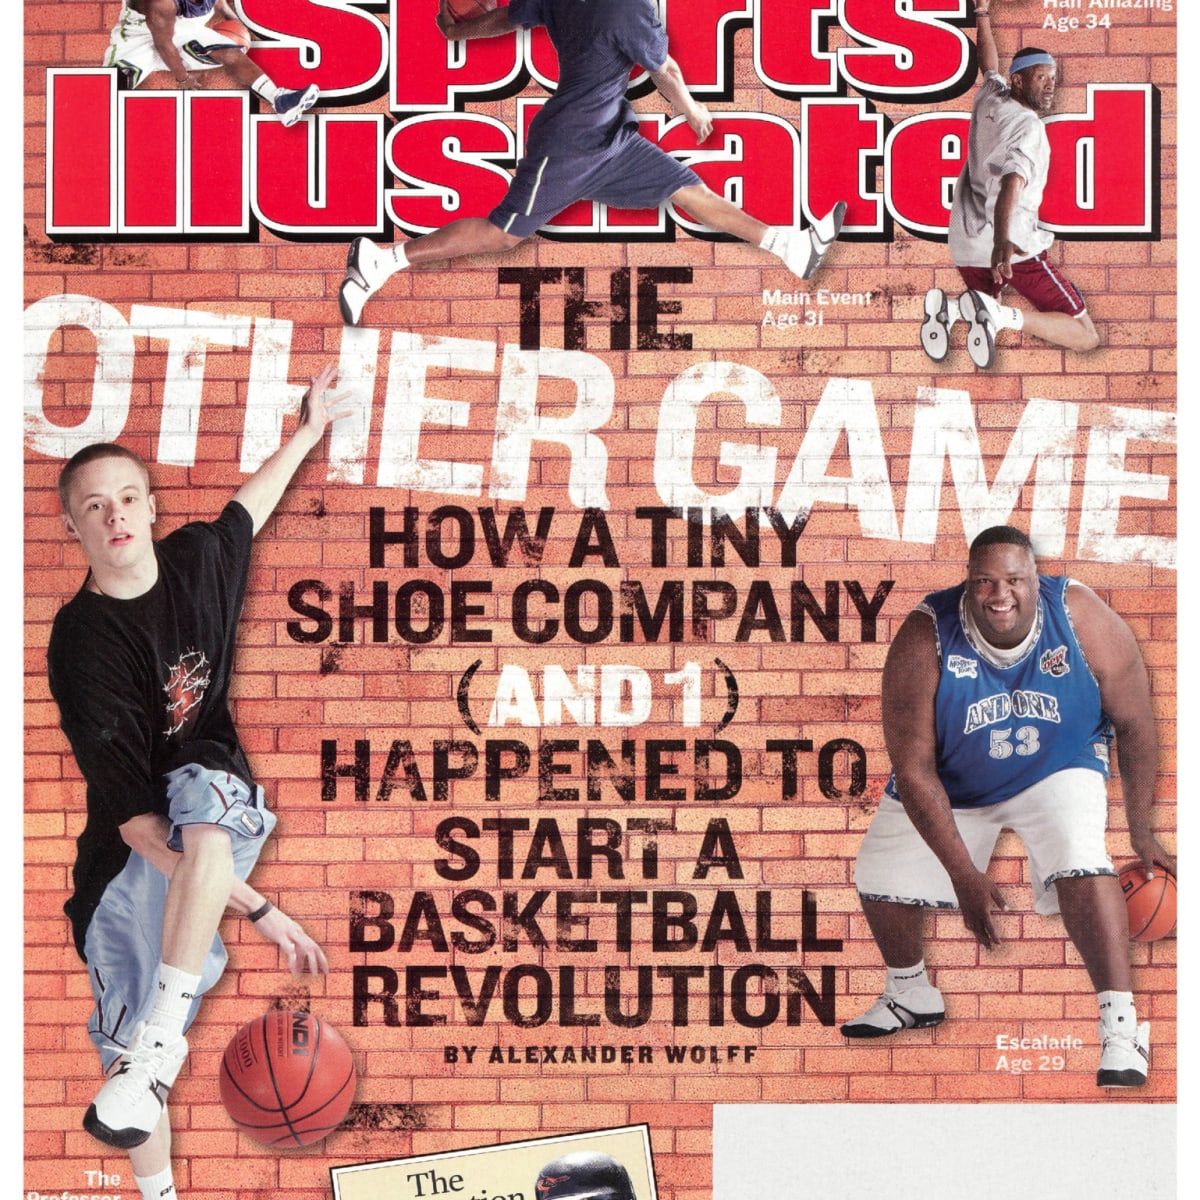 AND A LITTLE CHILD LED THEM - Sports Illustrated Vault